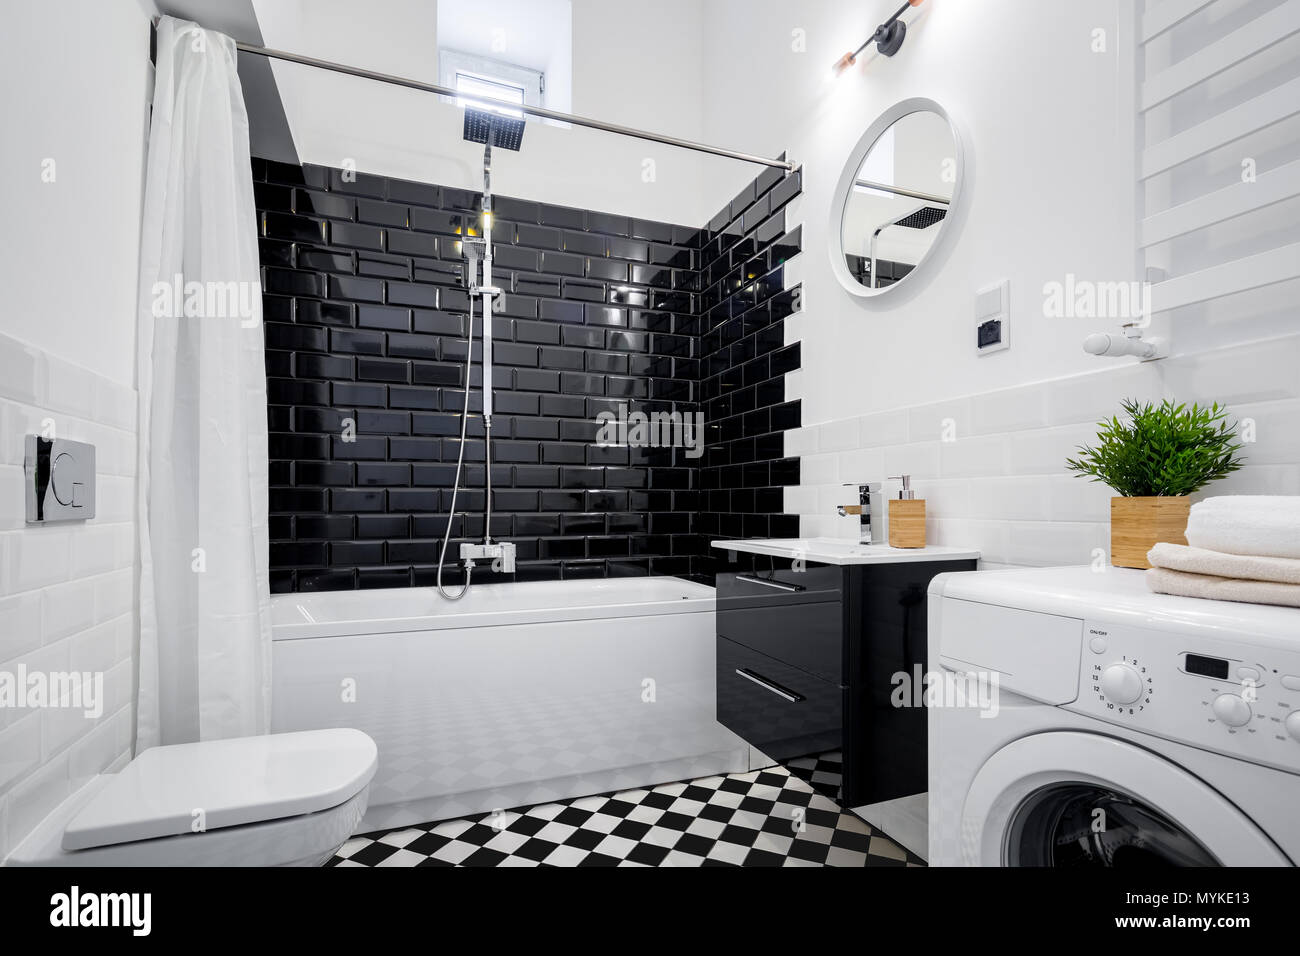 Black and white bathroom with bathtub, toilet and washer Stock Photo